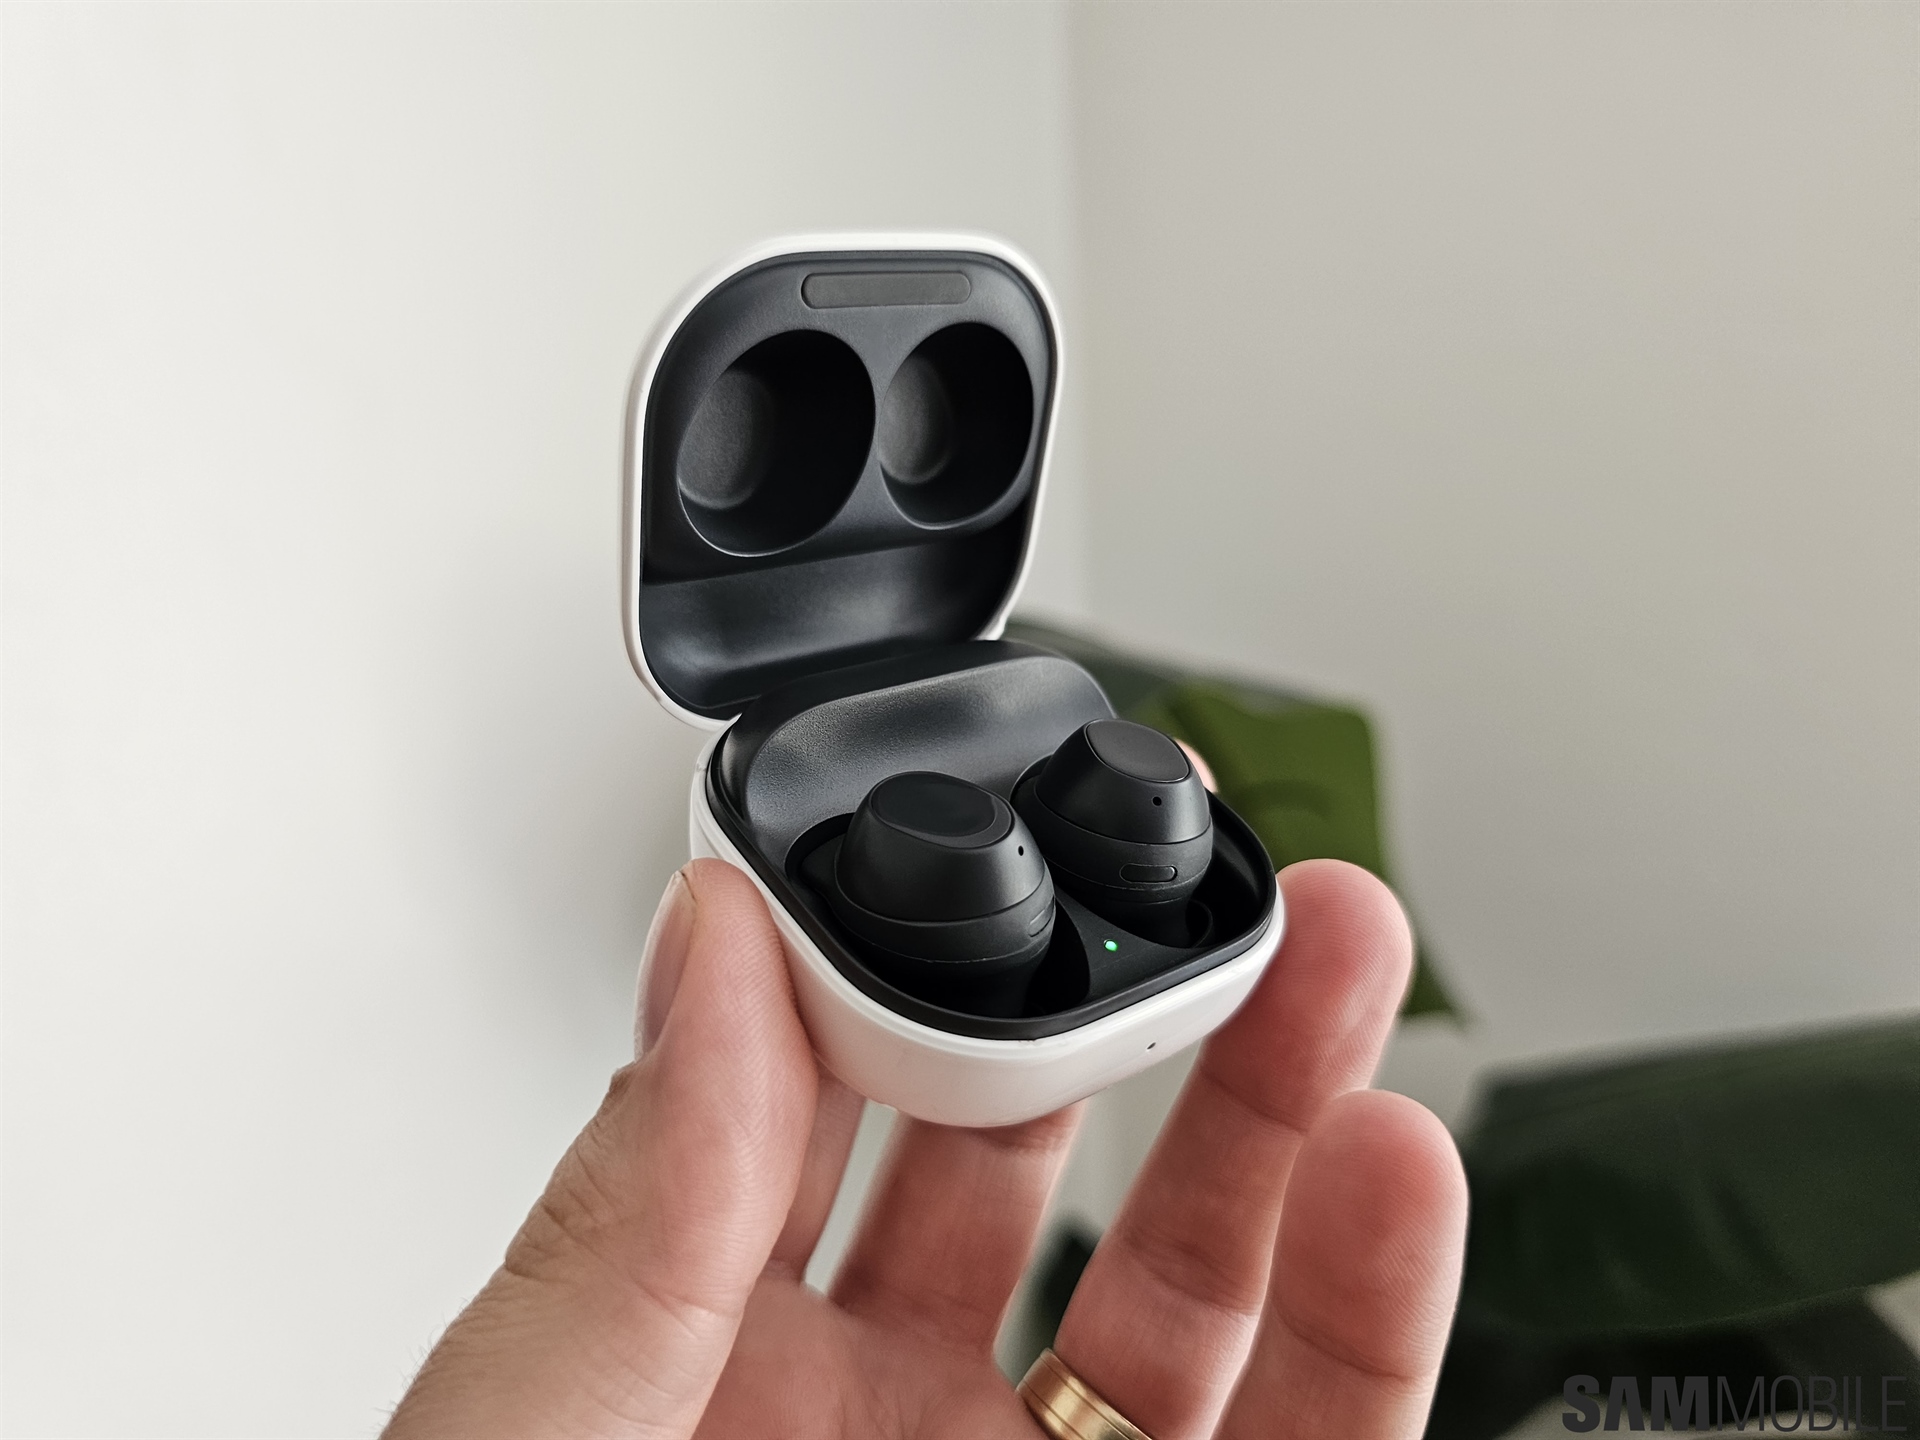 Samsung Galaxy Buds FE review: Better than the sum of its parts